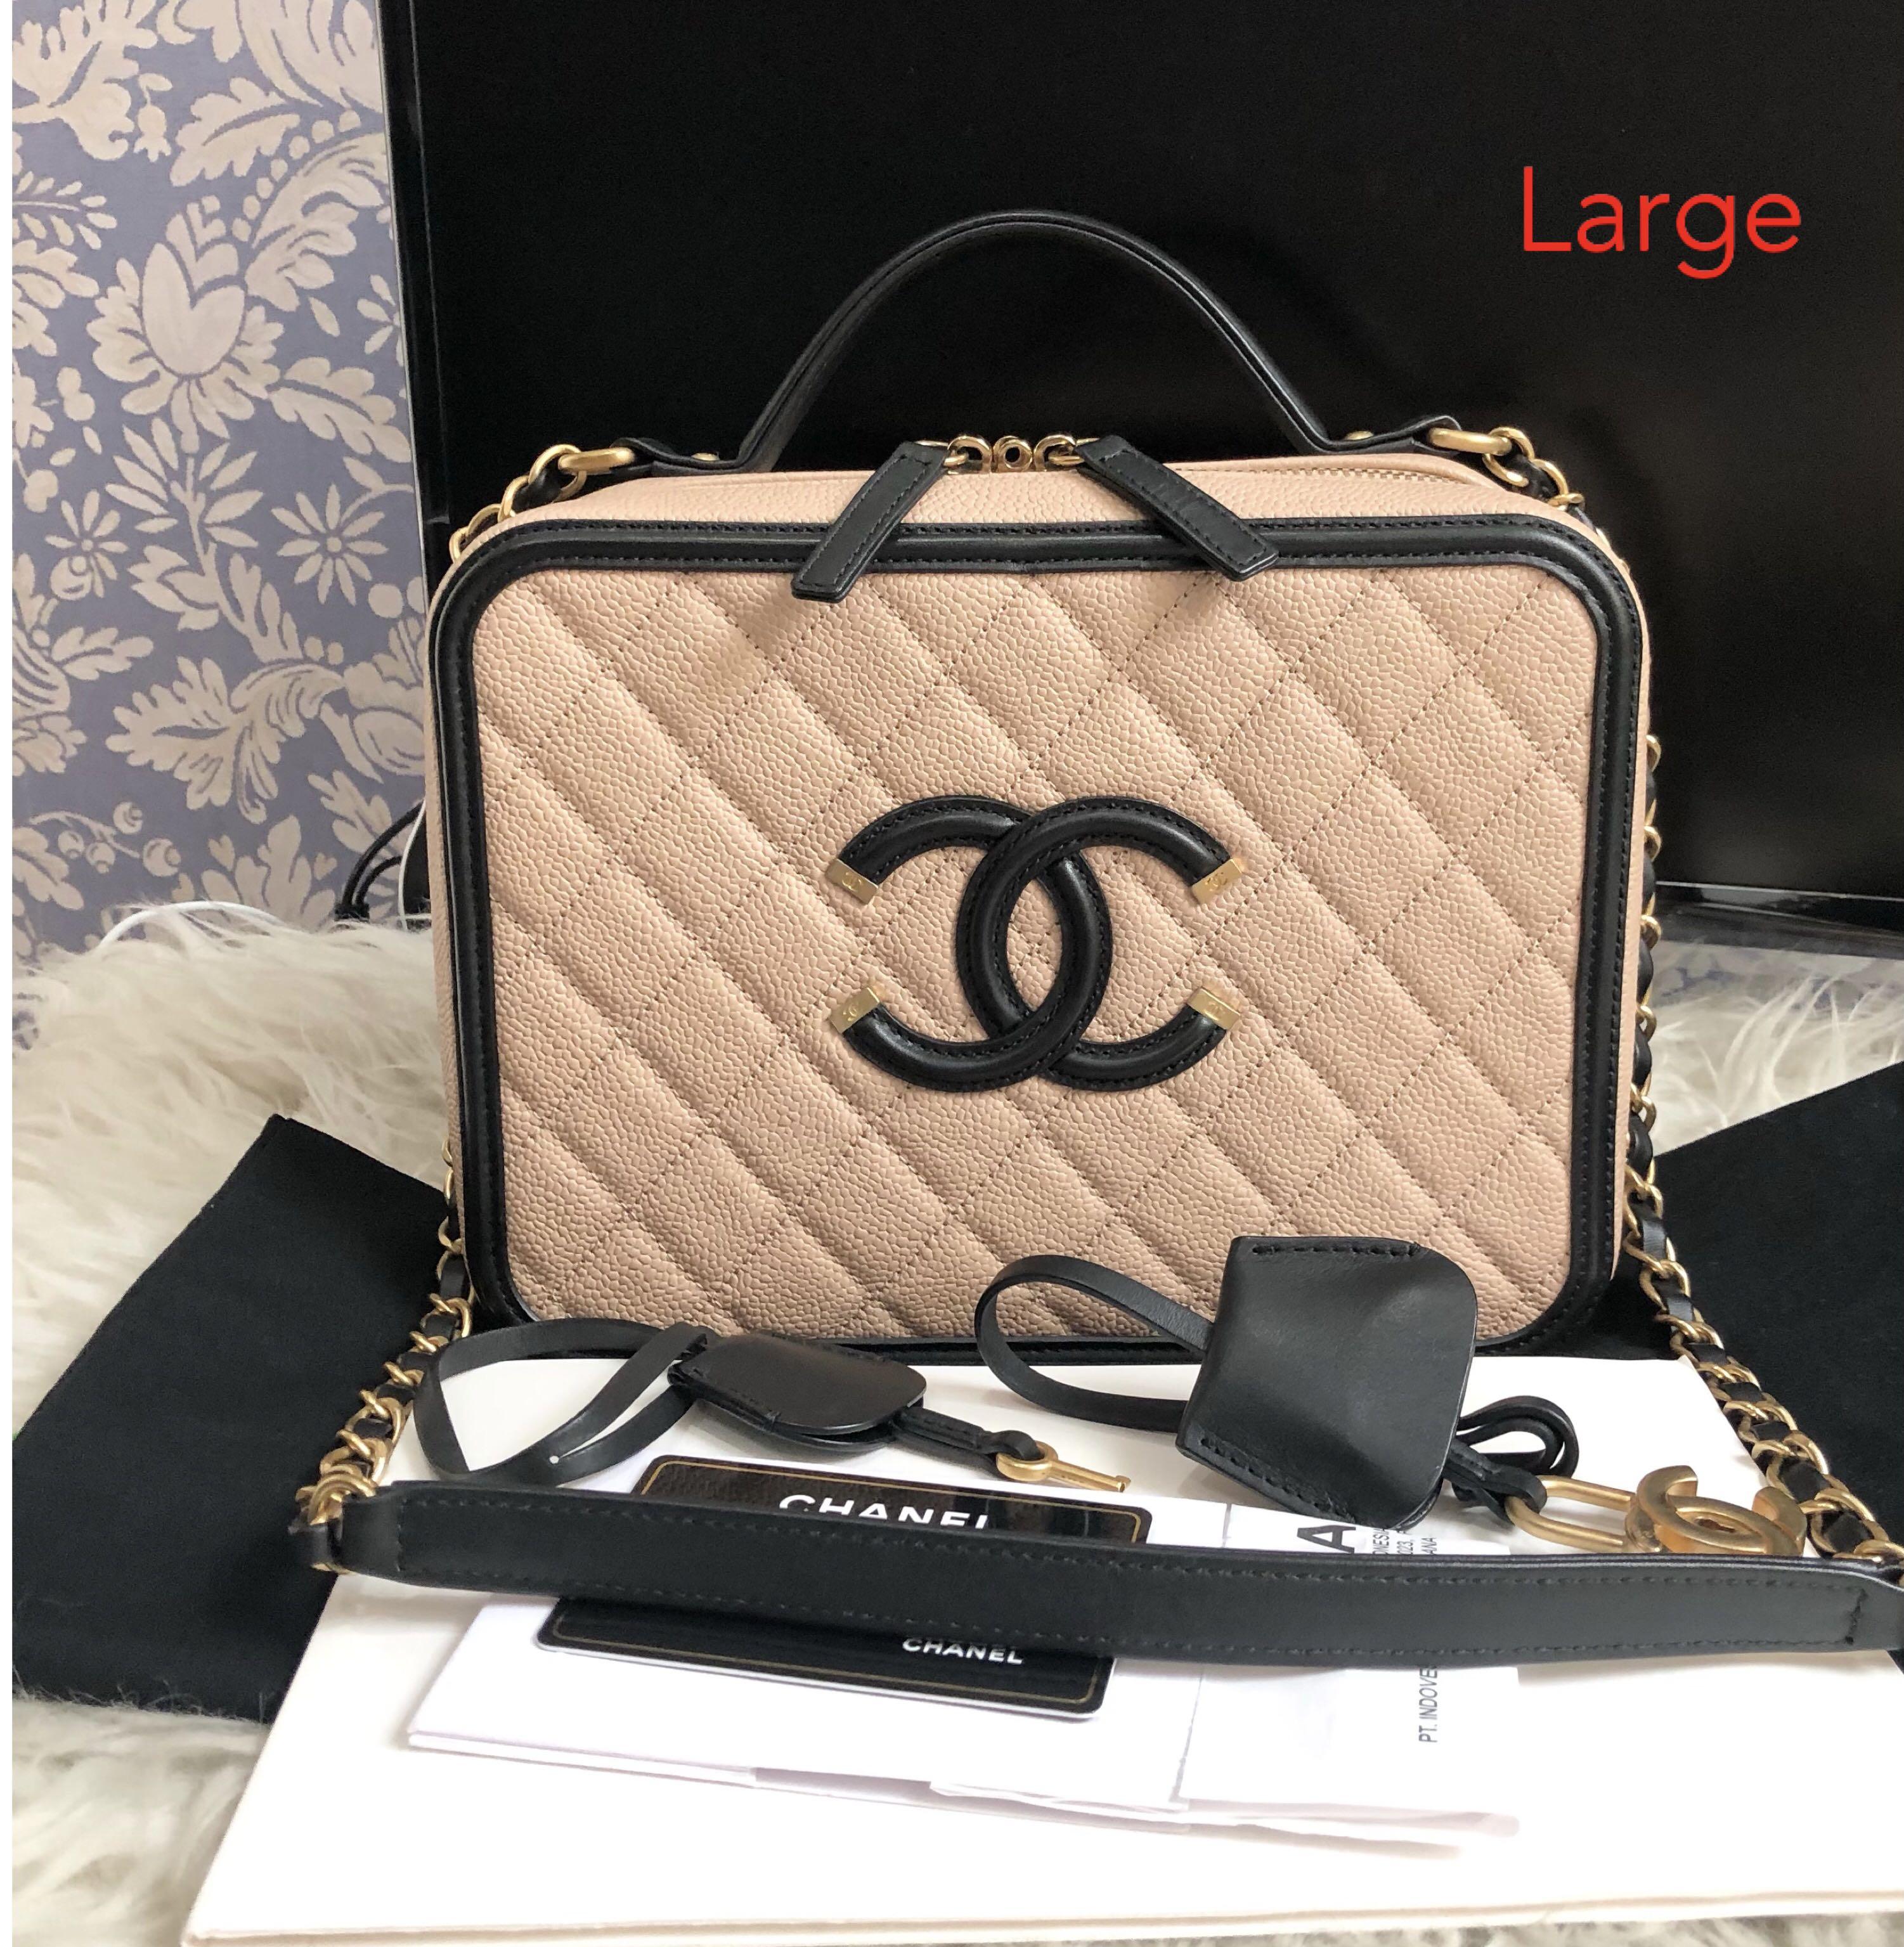 CHANEL, Bags, New Authentic Chanel Caviar Camera Bag With Chain